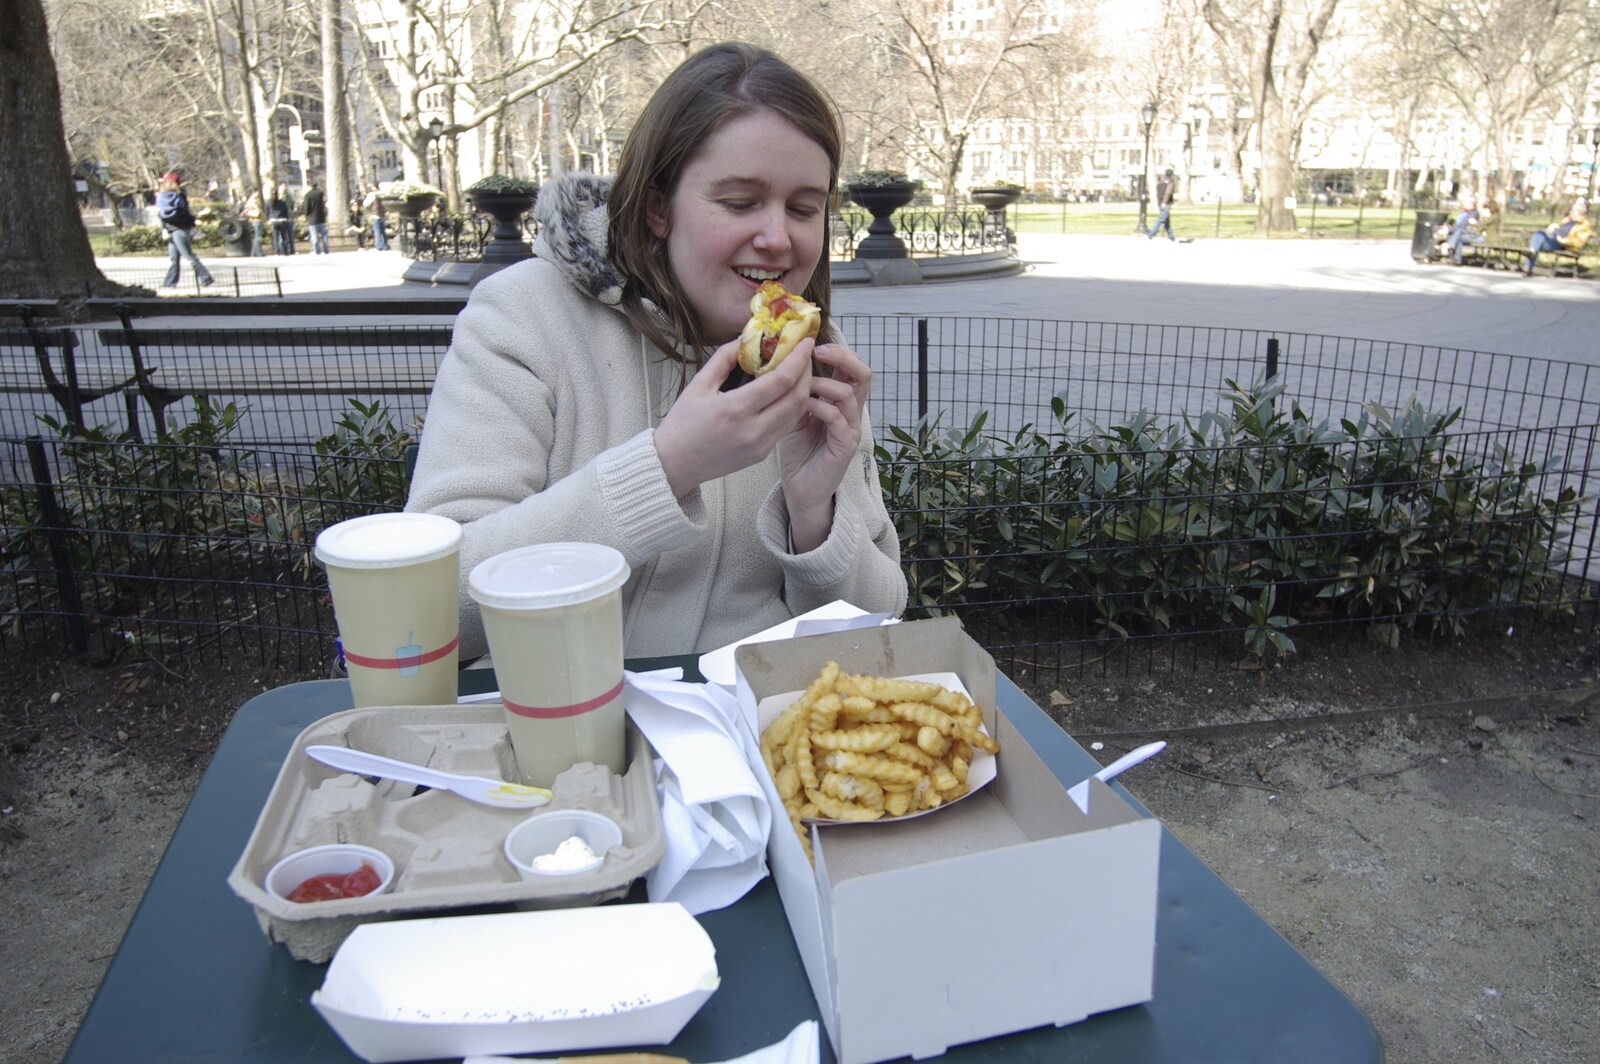 Crossing Brooklyn Bridge, New York, US - 26th March 2007: Isobel eats a hot dog, with curly fries